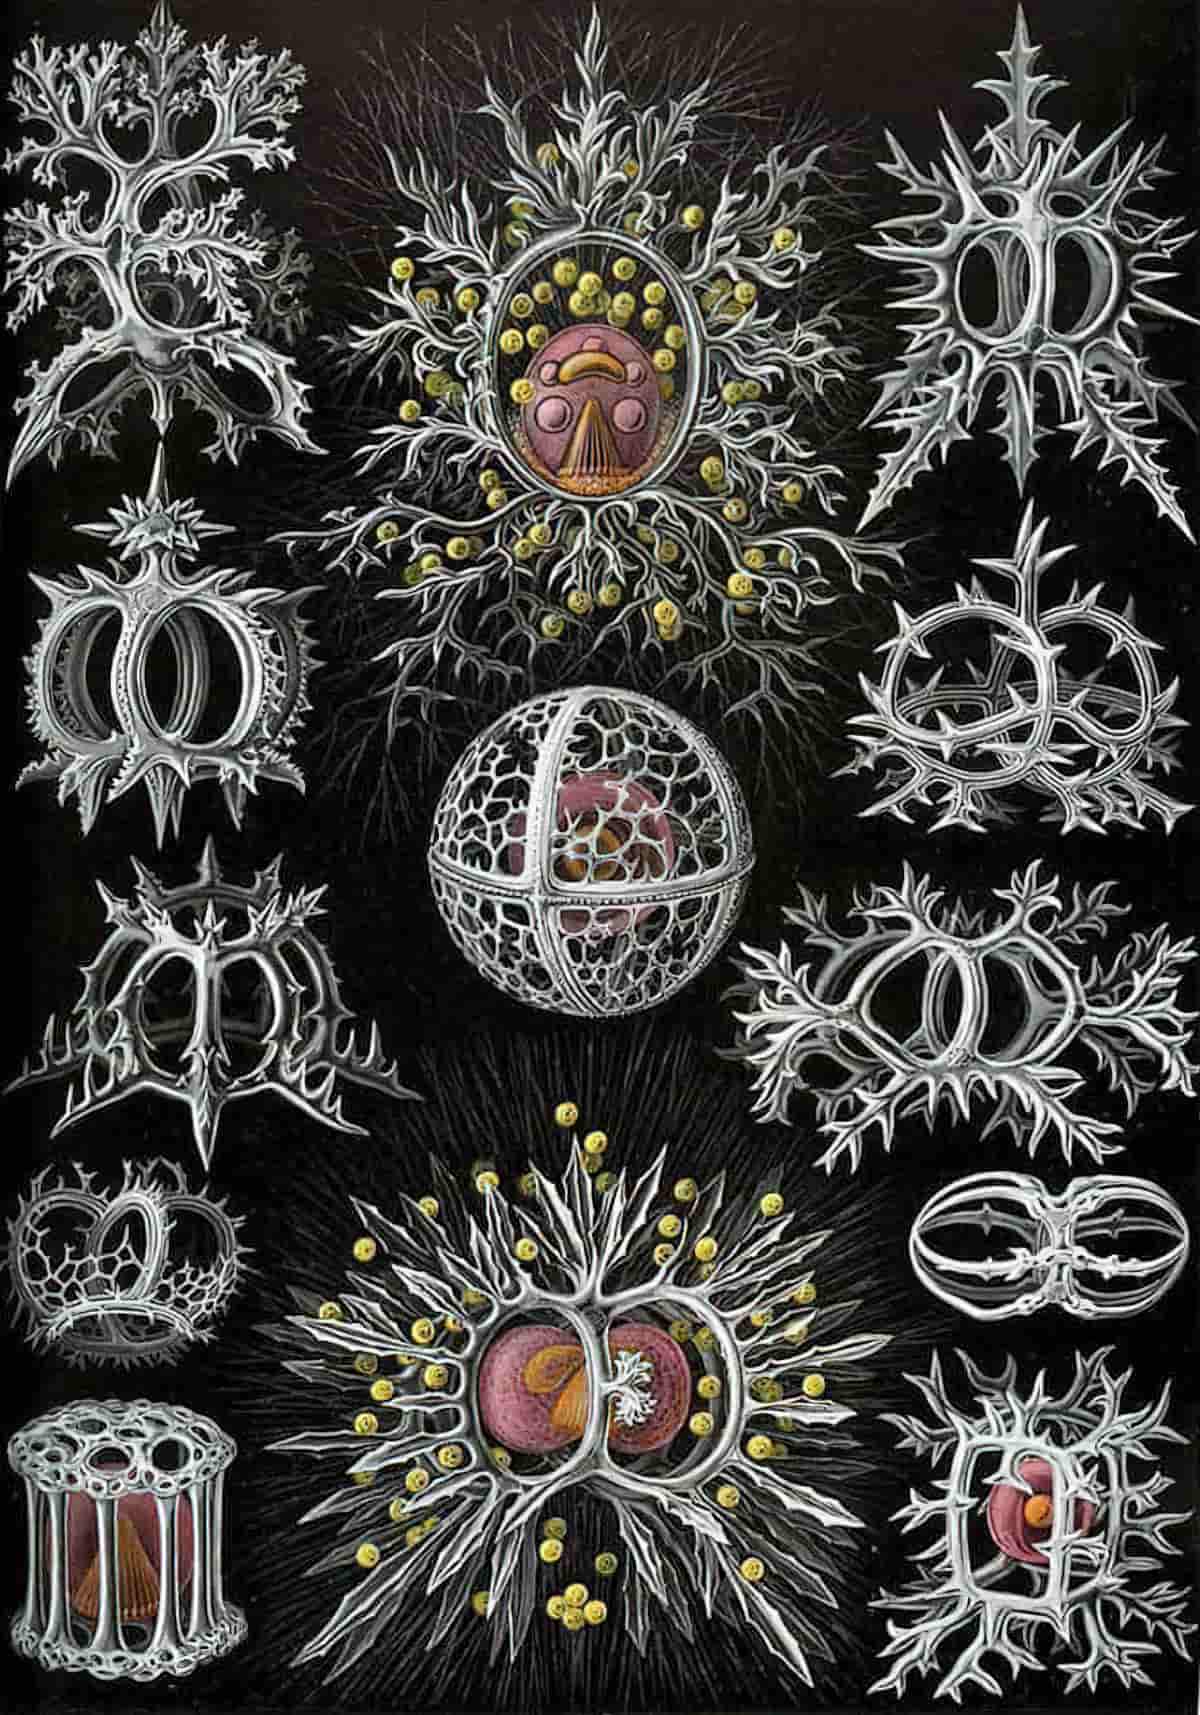 Ernst Haeckel, (German, 1834-Jena, August 8, 1919), Illustration No. 71, Stephoidea from Art forms in Nature, 1904